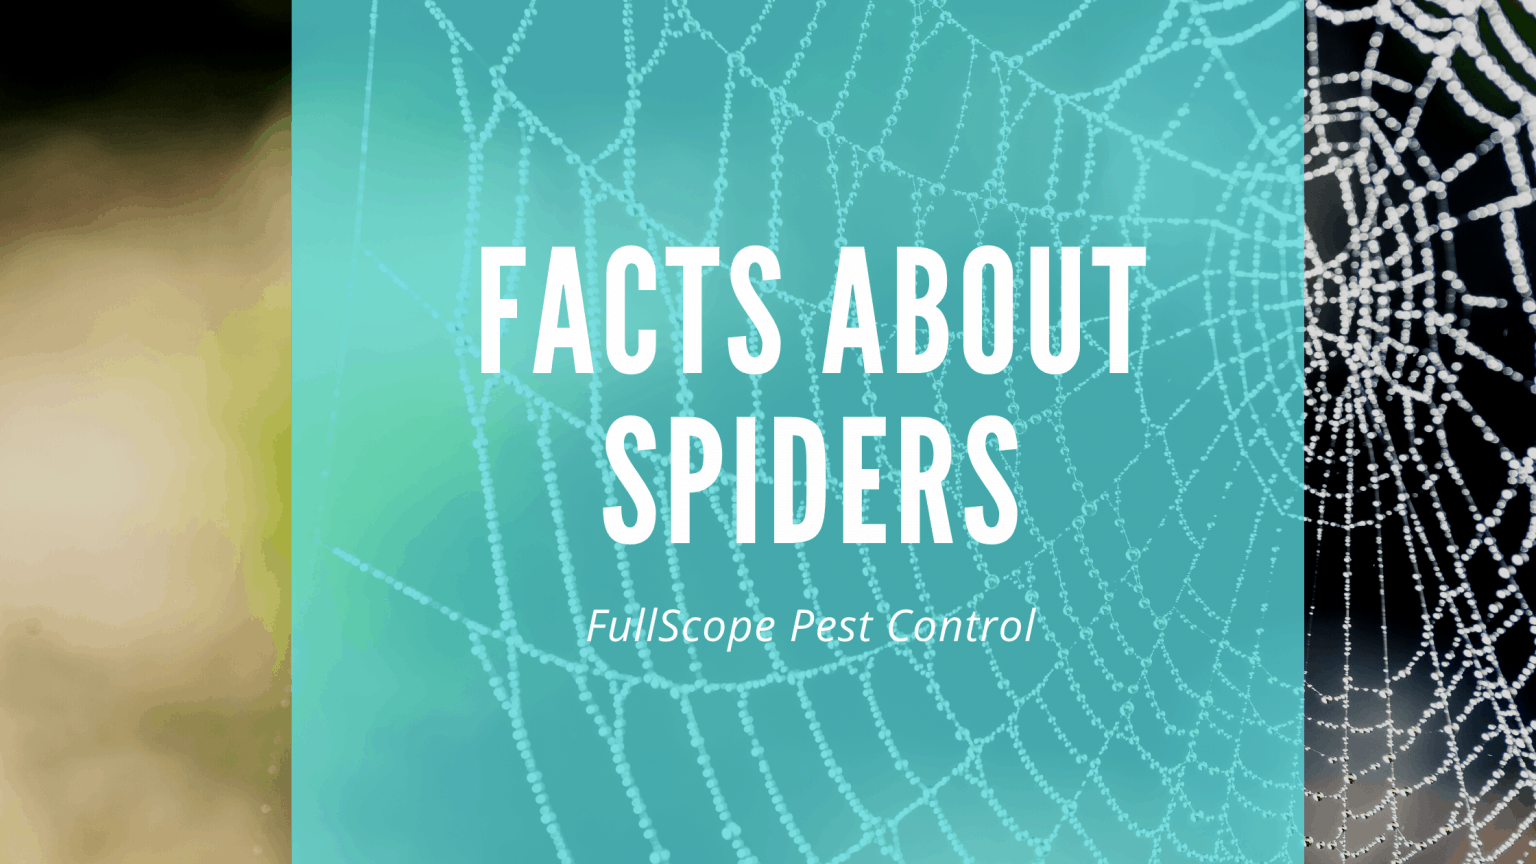 Facts-About-Spiders-1536x864